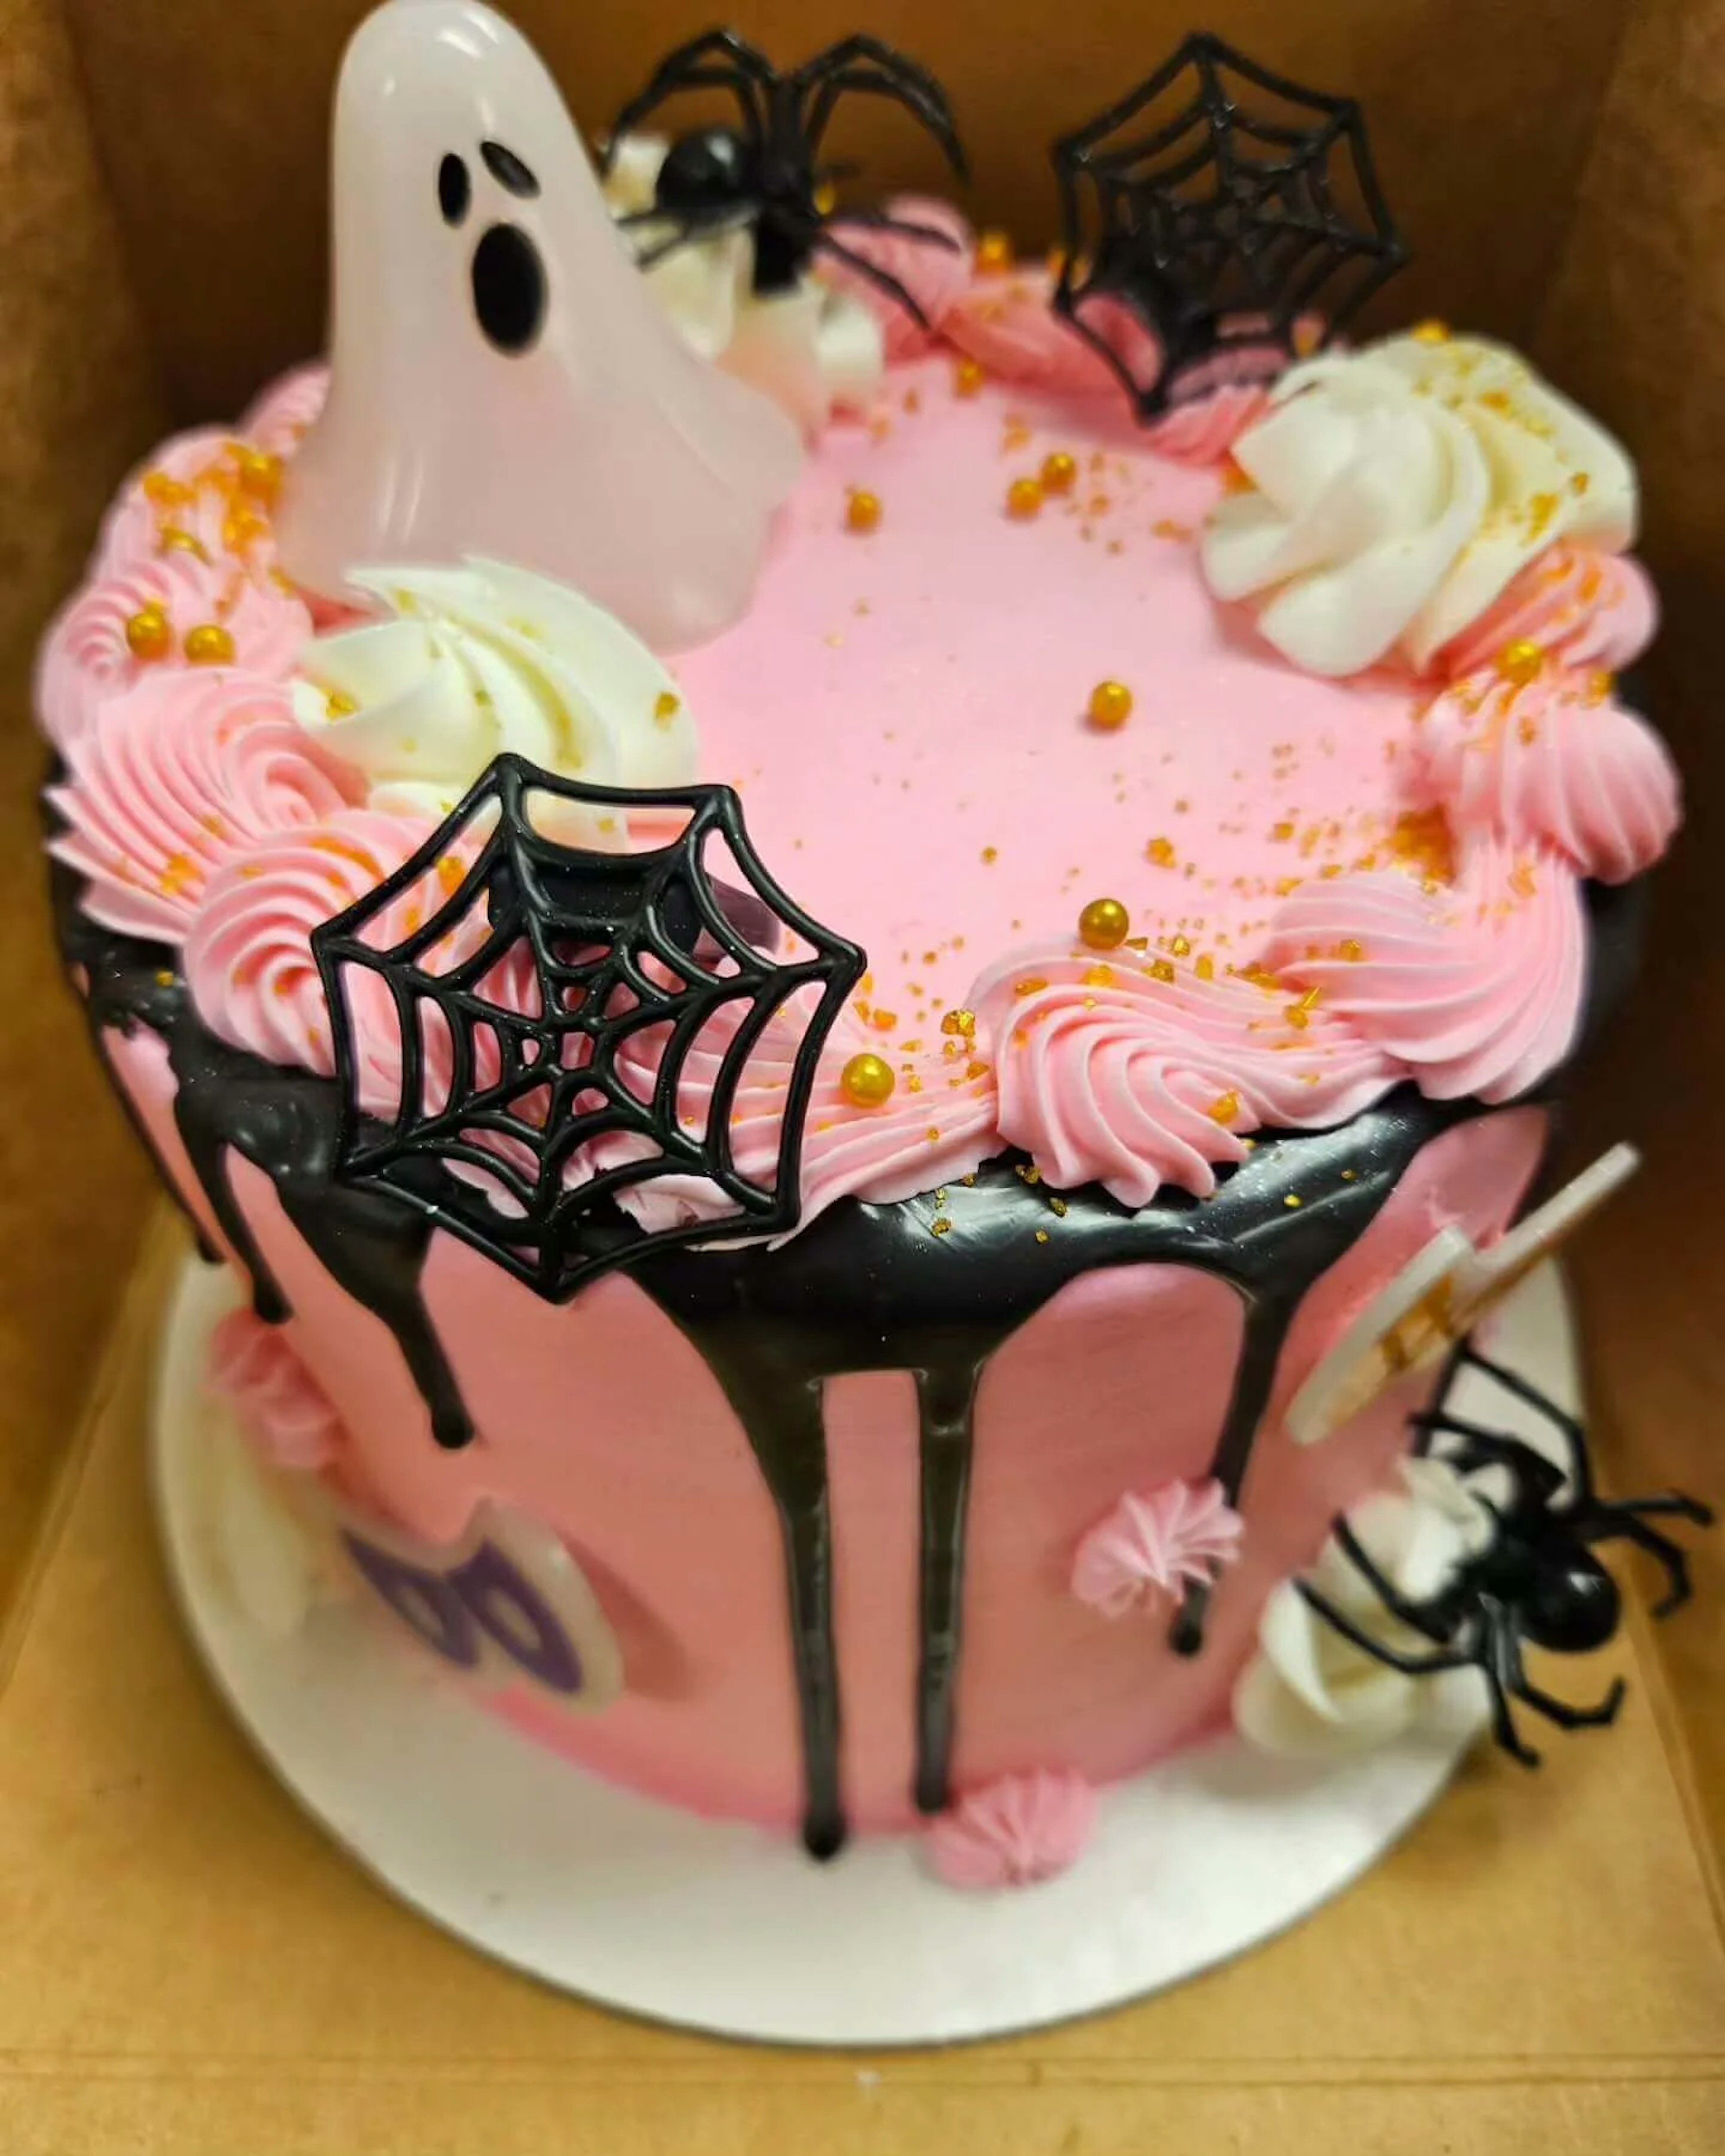 Halloween themed cake with pink frosting.